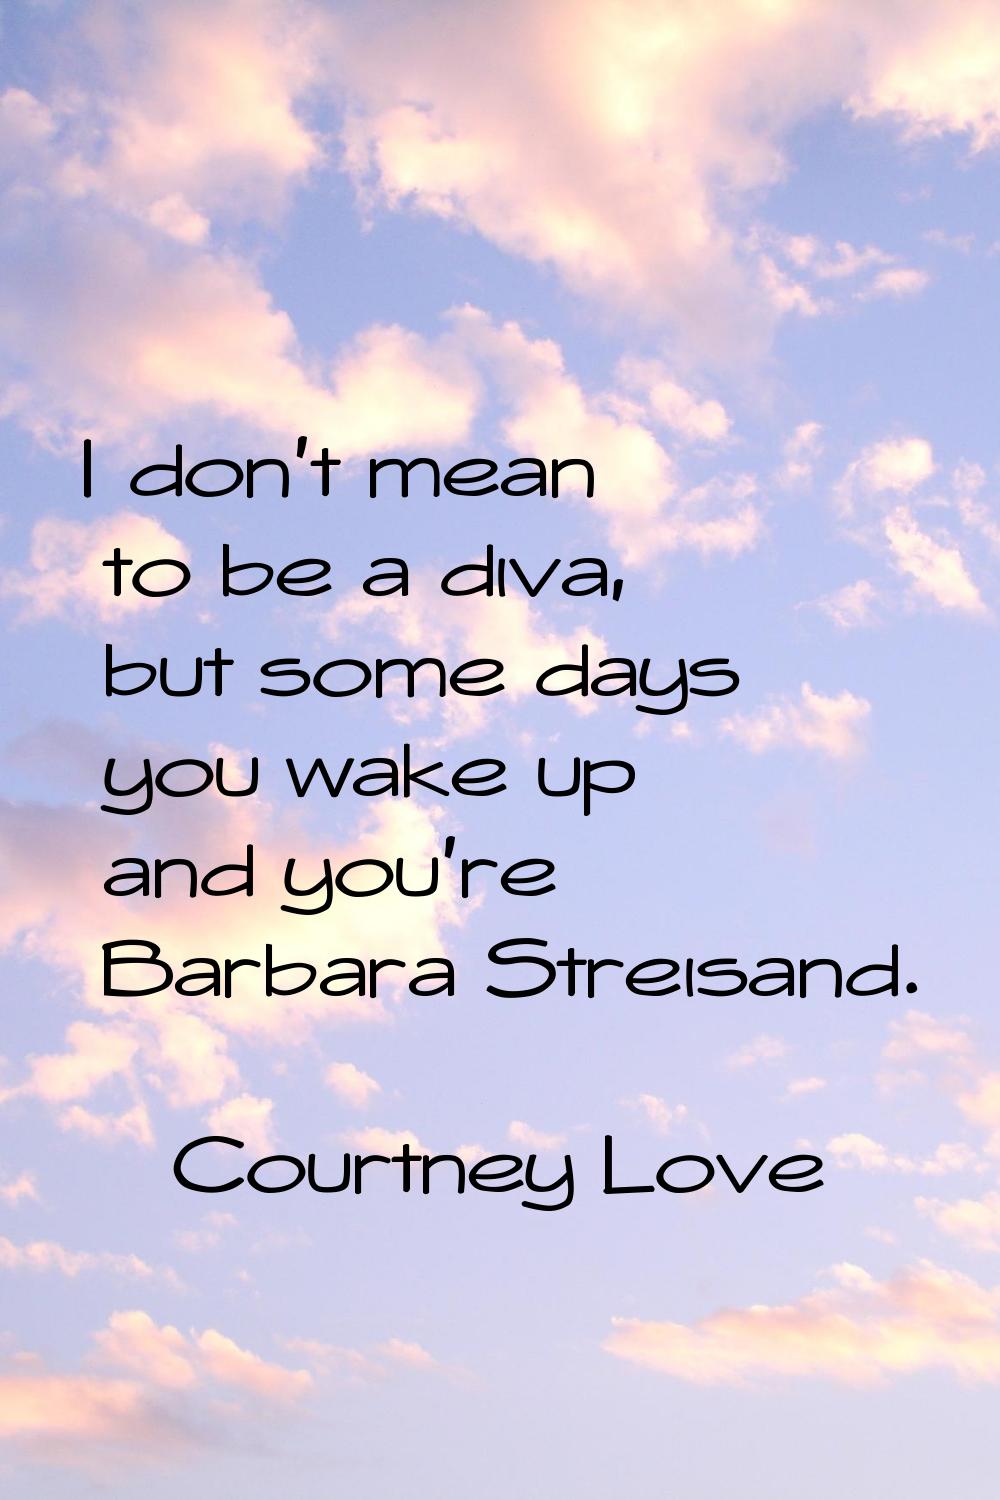 I don't mean to be a diva, but some days you wake up and you're Barbara Streisand.